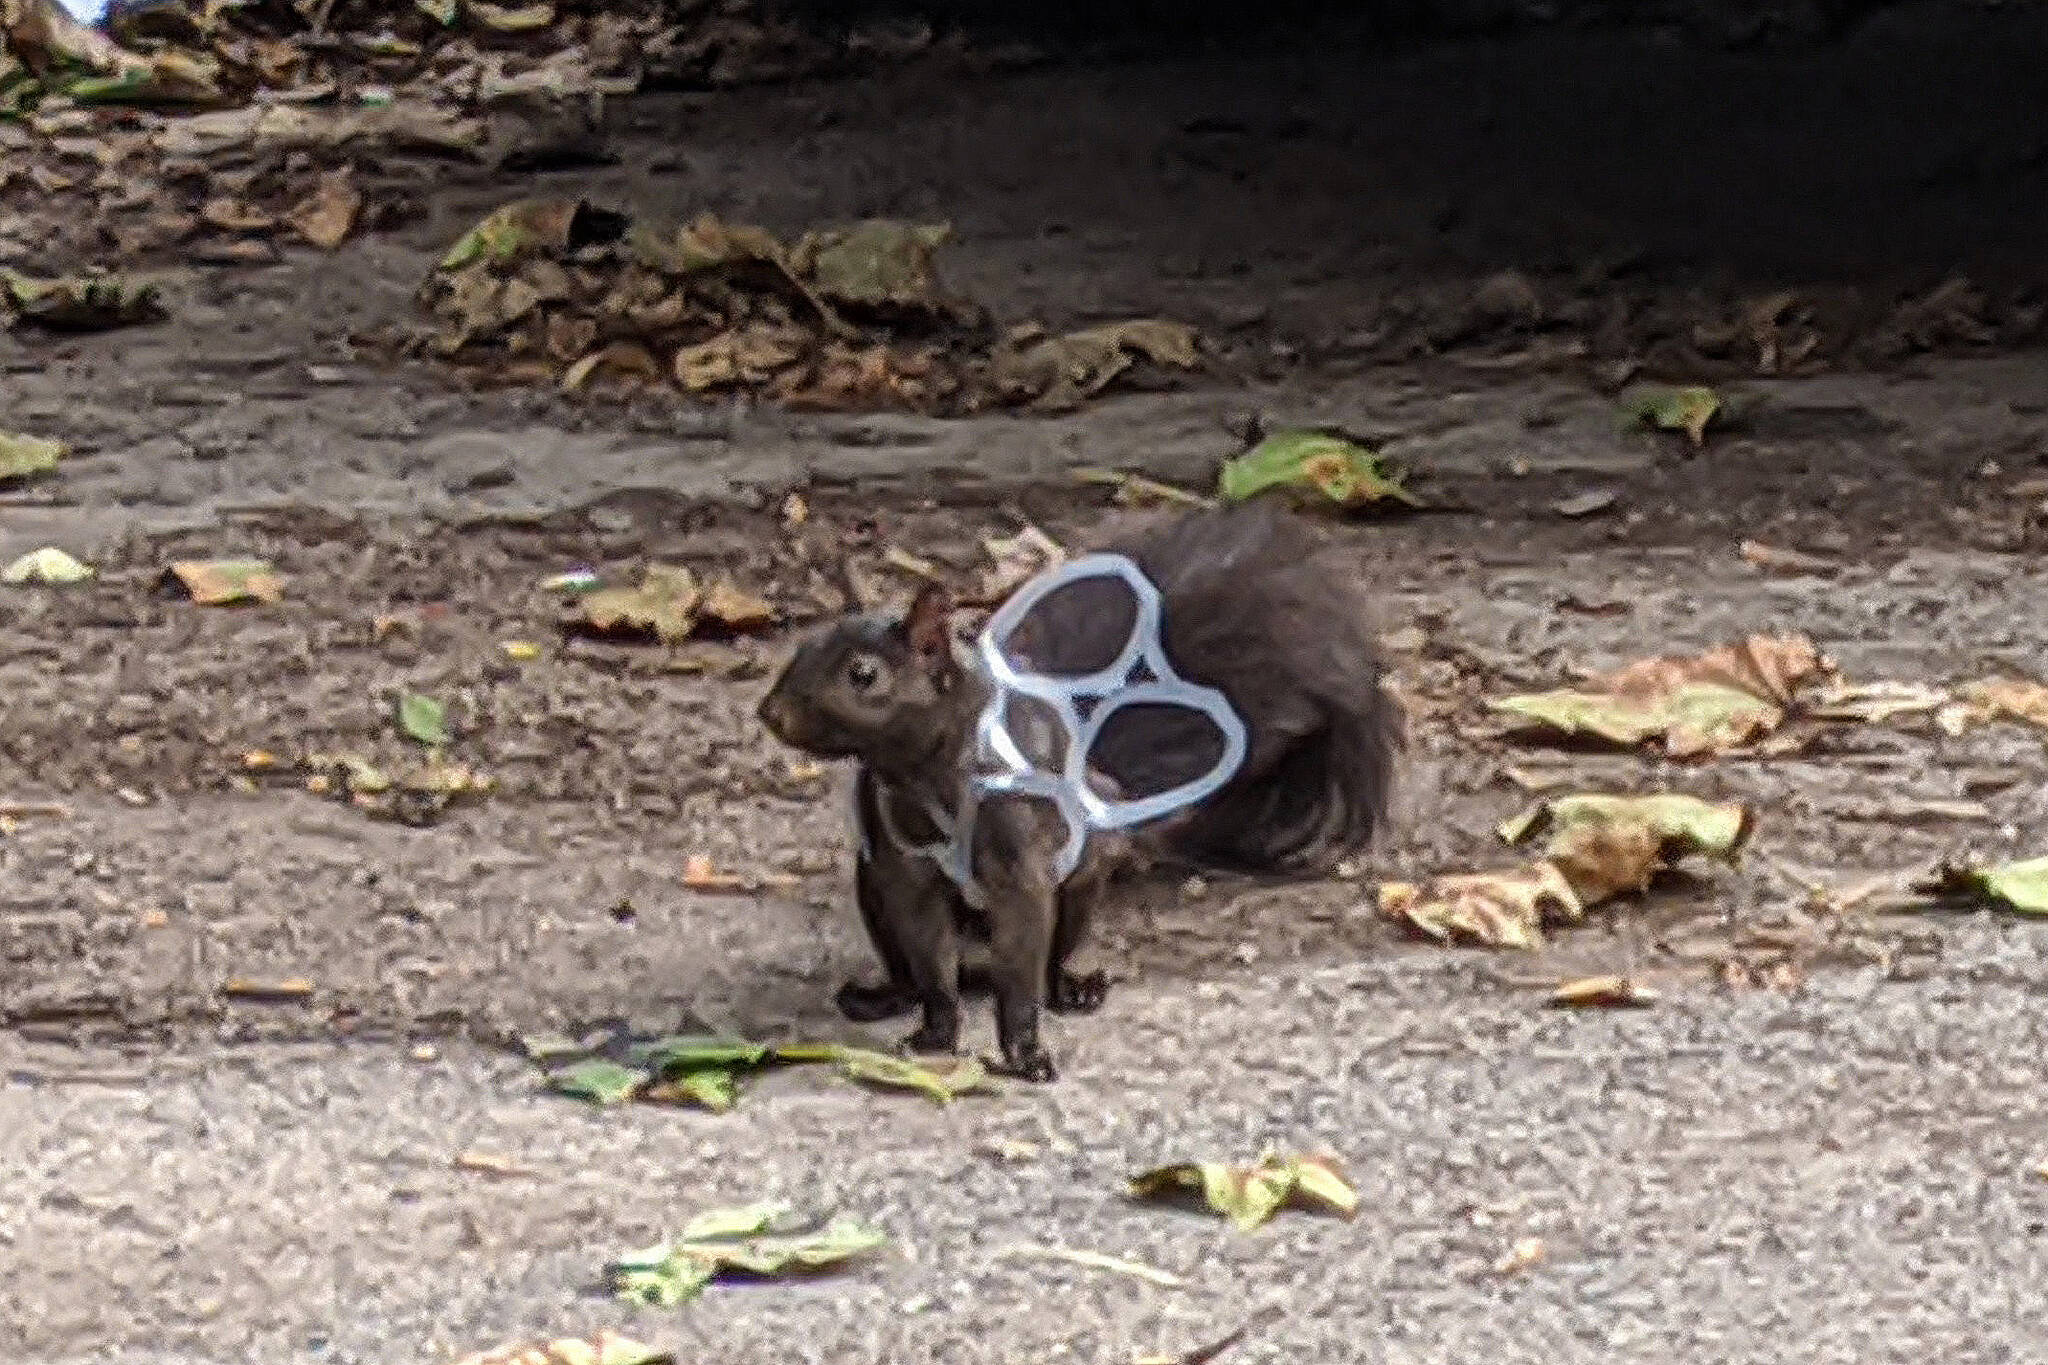 Squirrel caught in six-pack ring perfectly illustrates Toronto's trash  problem